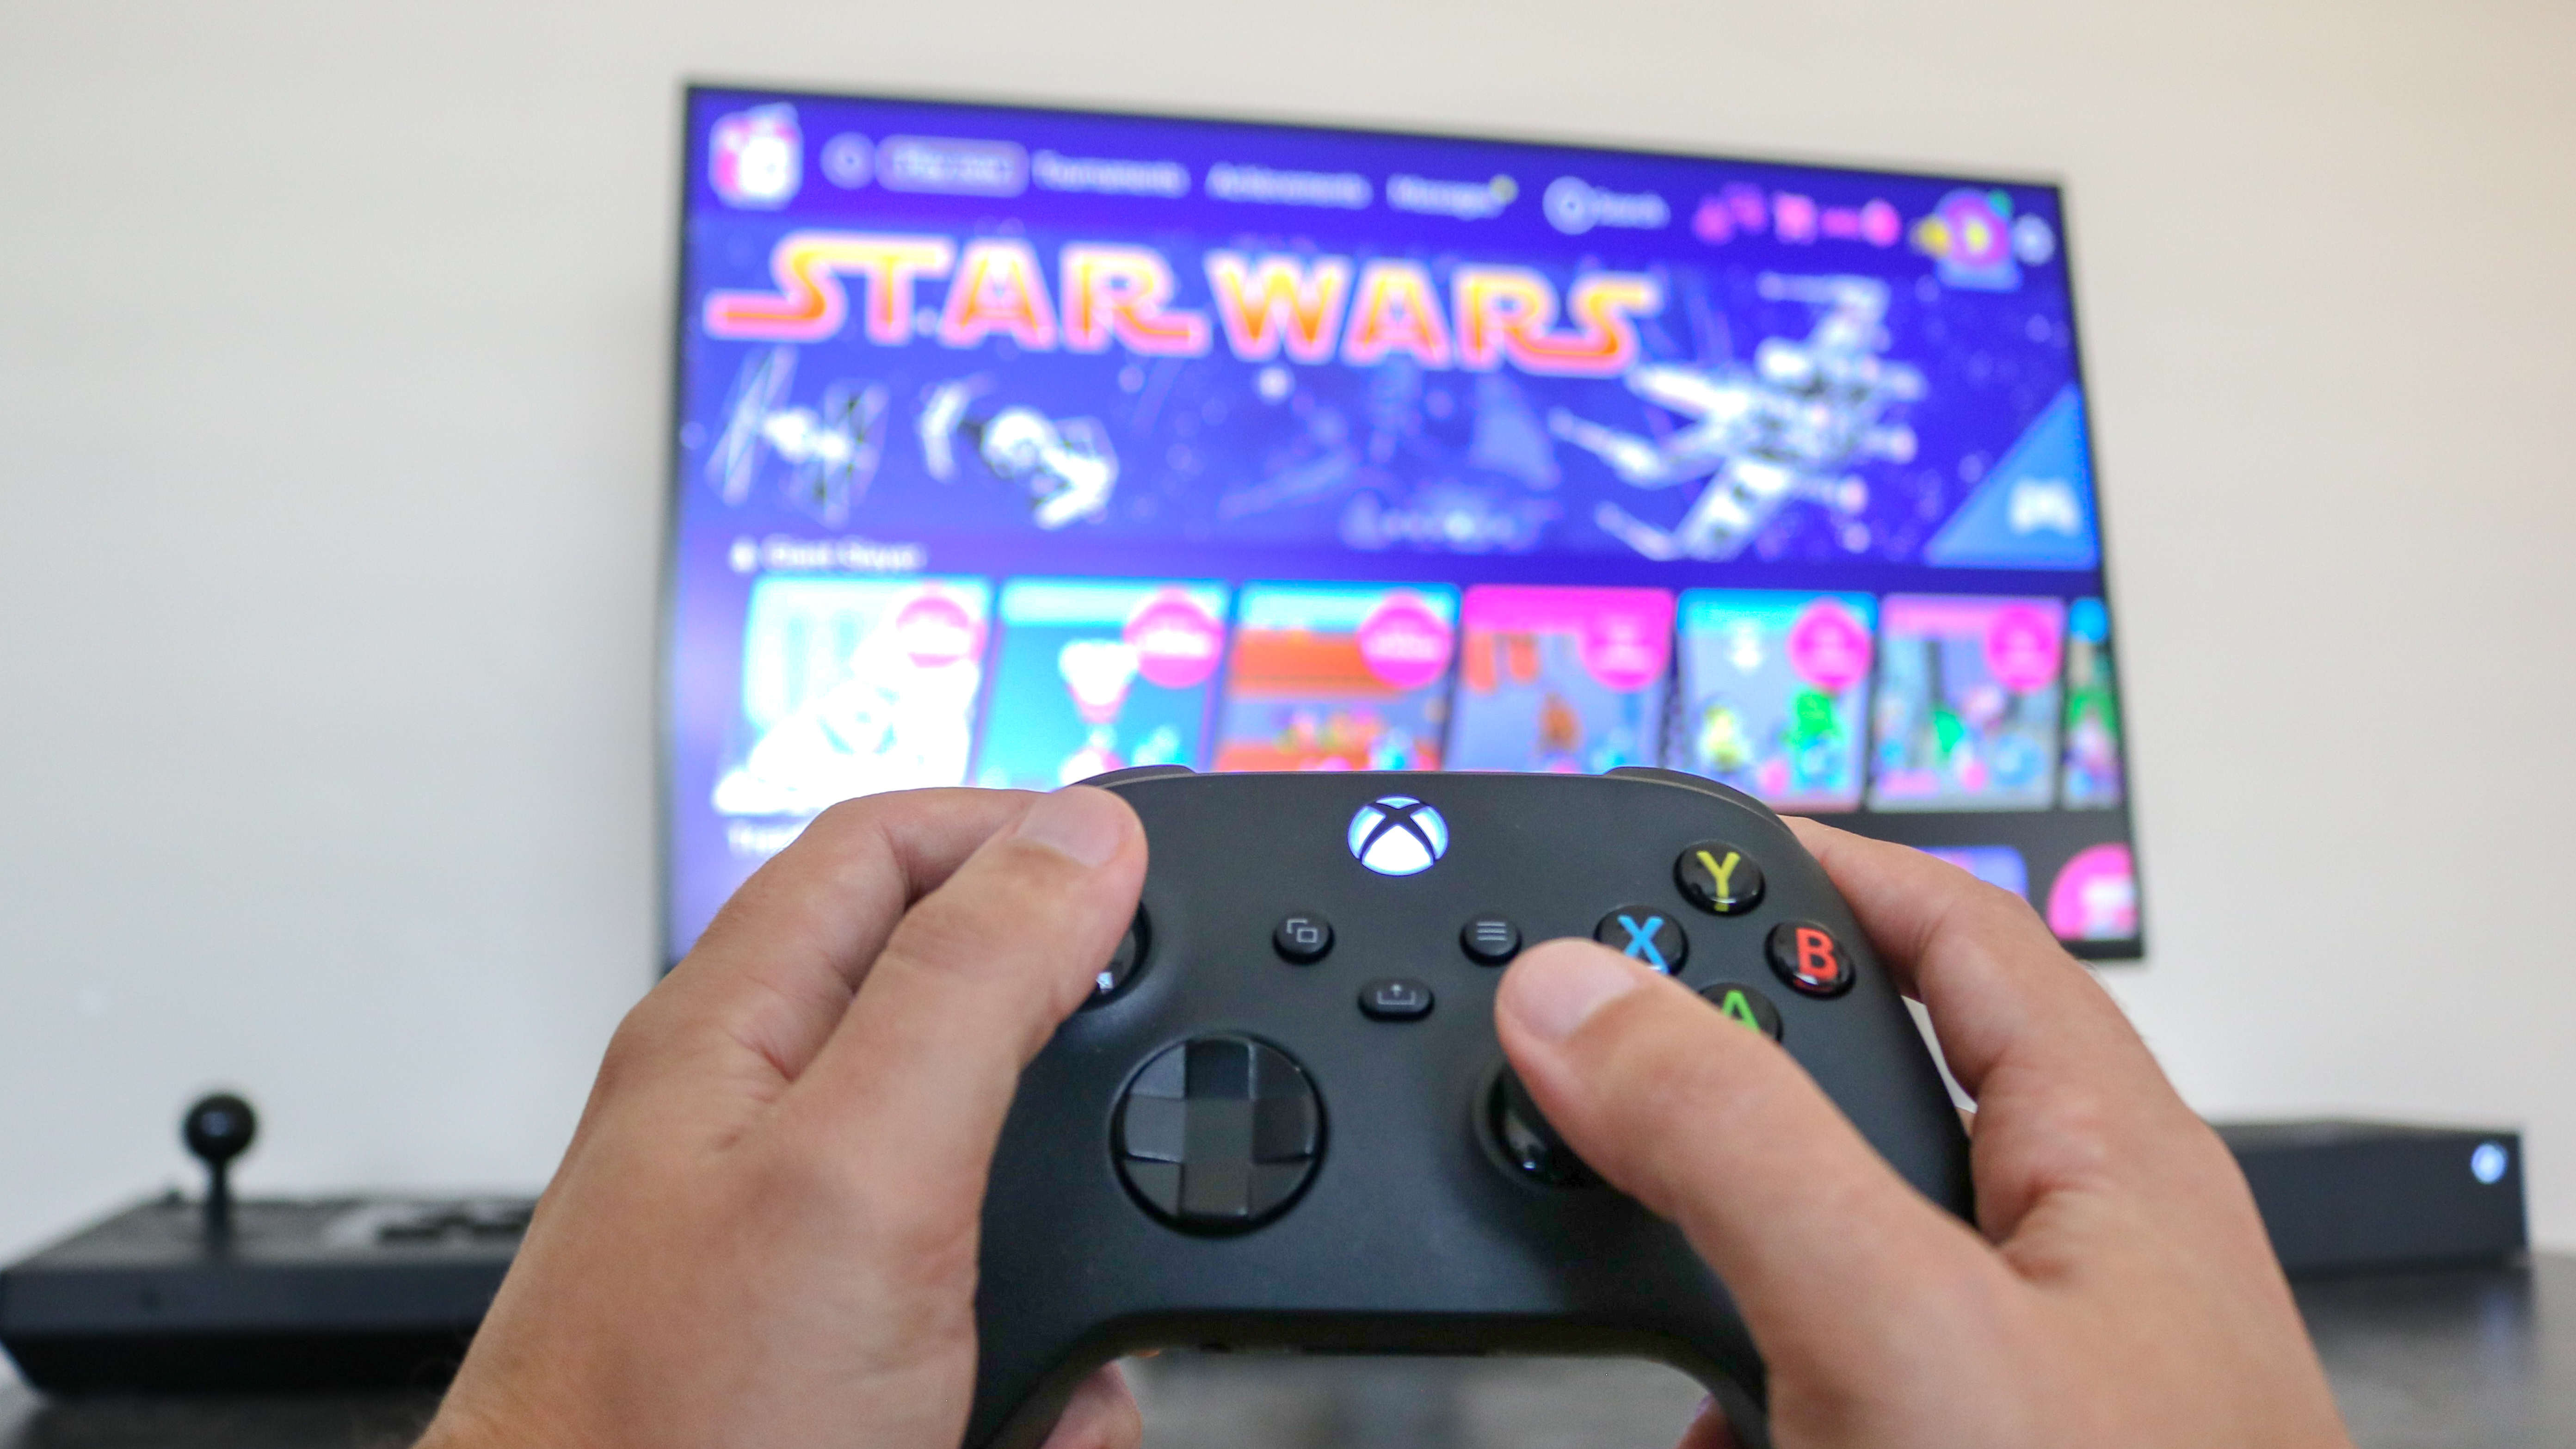 Antstream Arcade will bring cloud gaming service and 1,300 retro titles to  Xbox – GeekWire